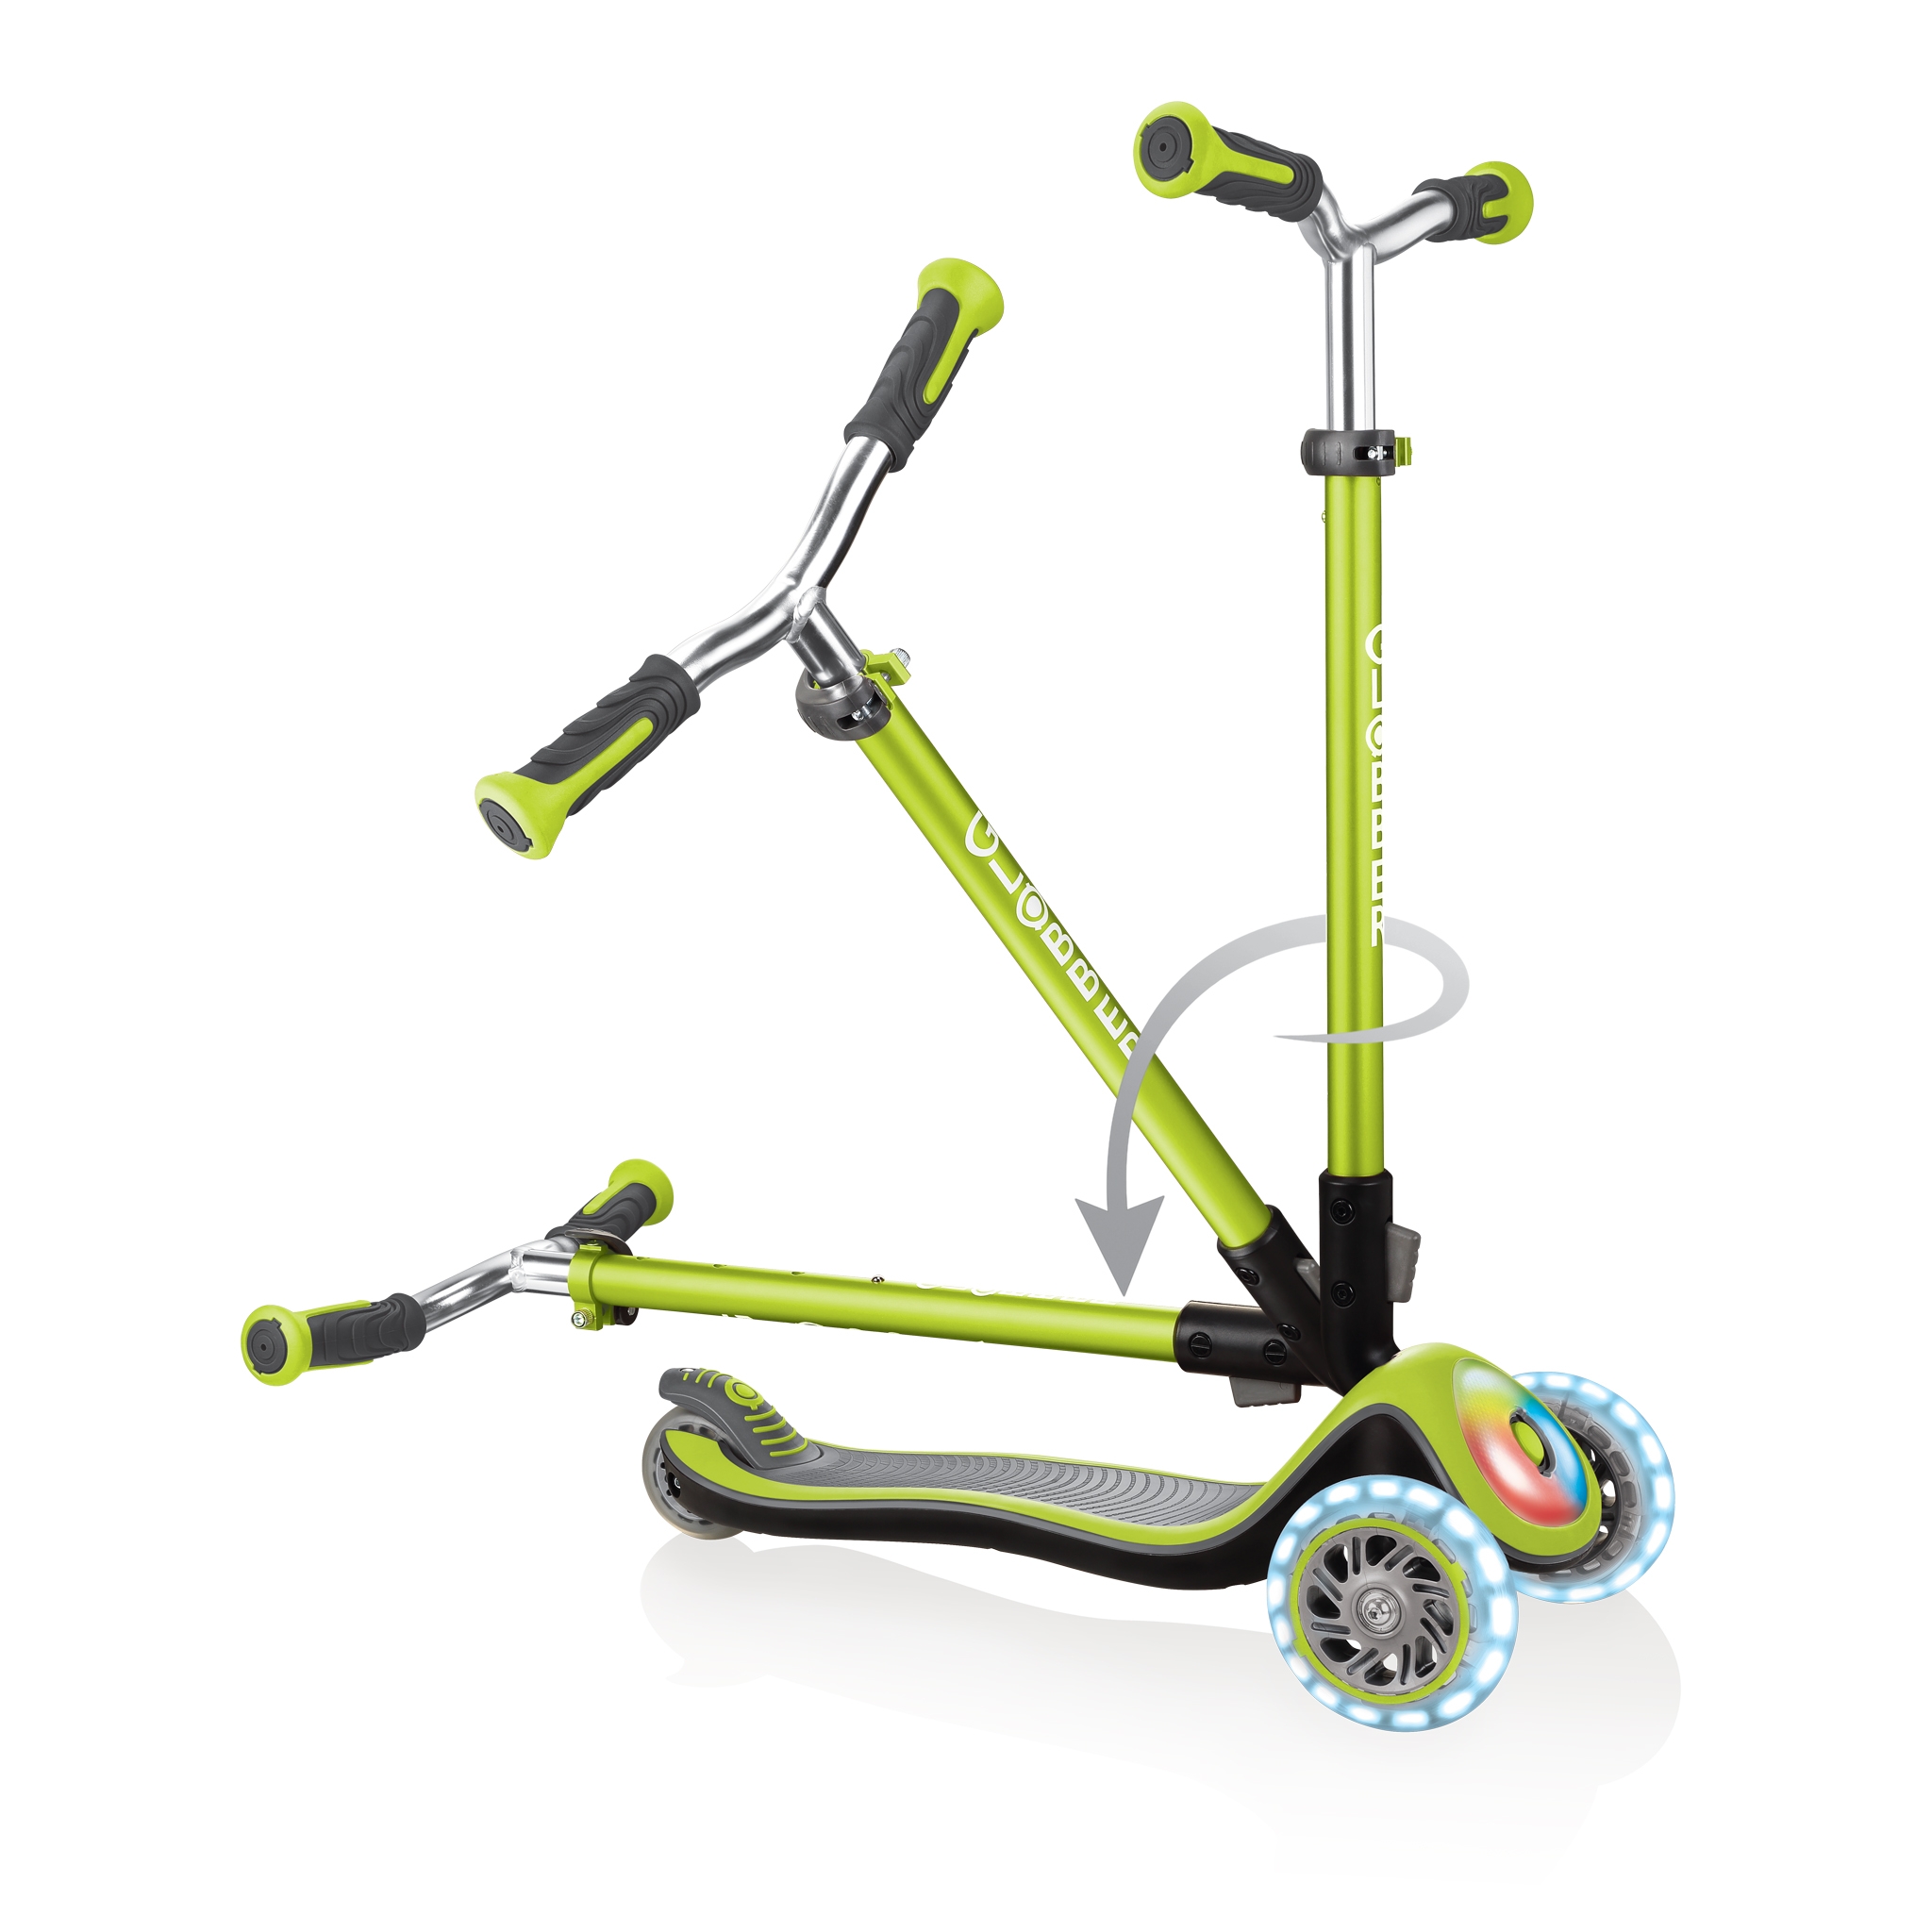 Globber-ELITE-PRIME-best-3-wheel-scooter-for-kids-with-patented-folding-system-lime-green 3